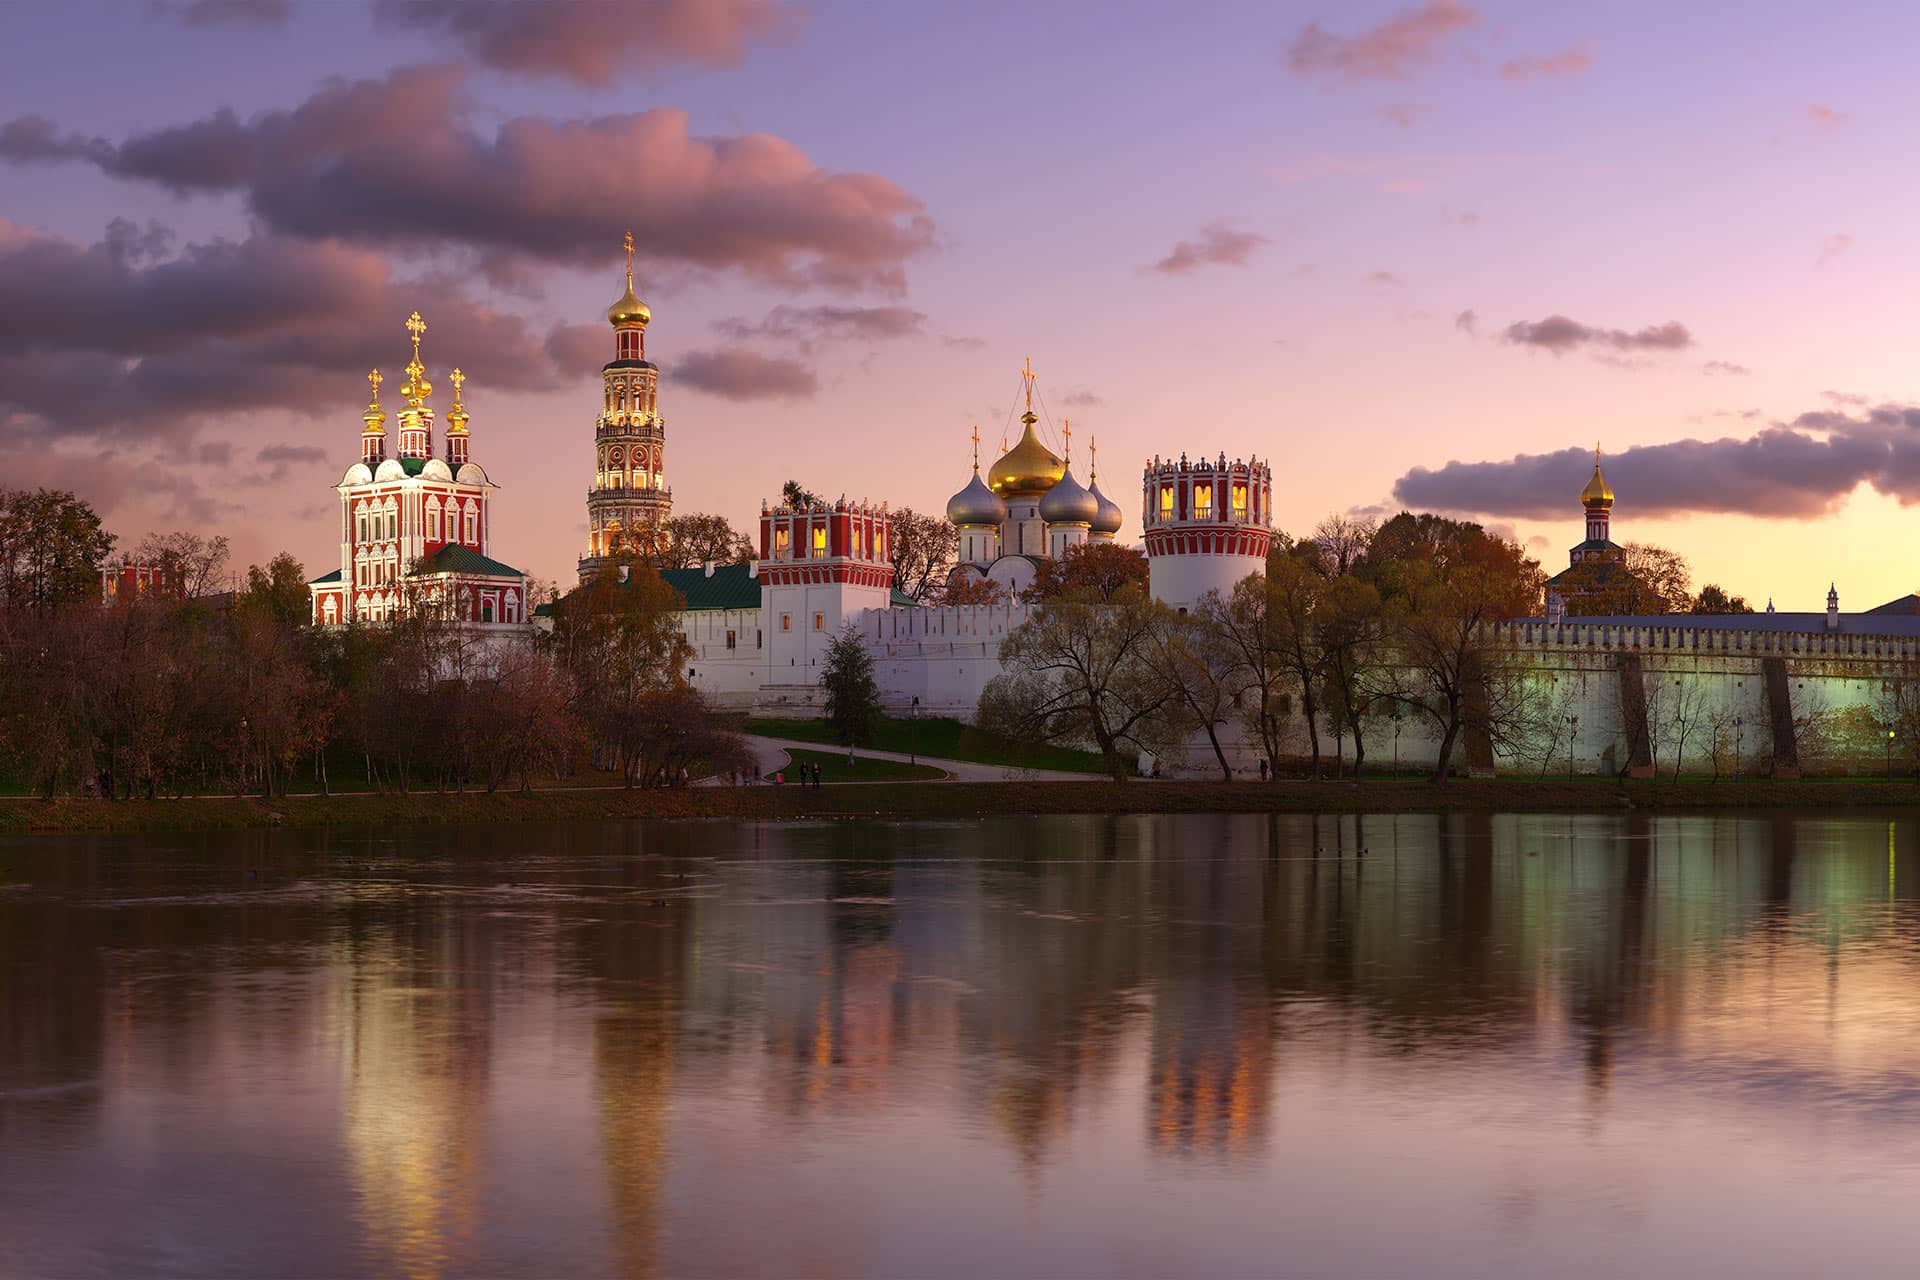 An architectural ensemble of several orthodox churches behind the white wall on a river bank in the evening